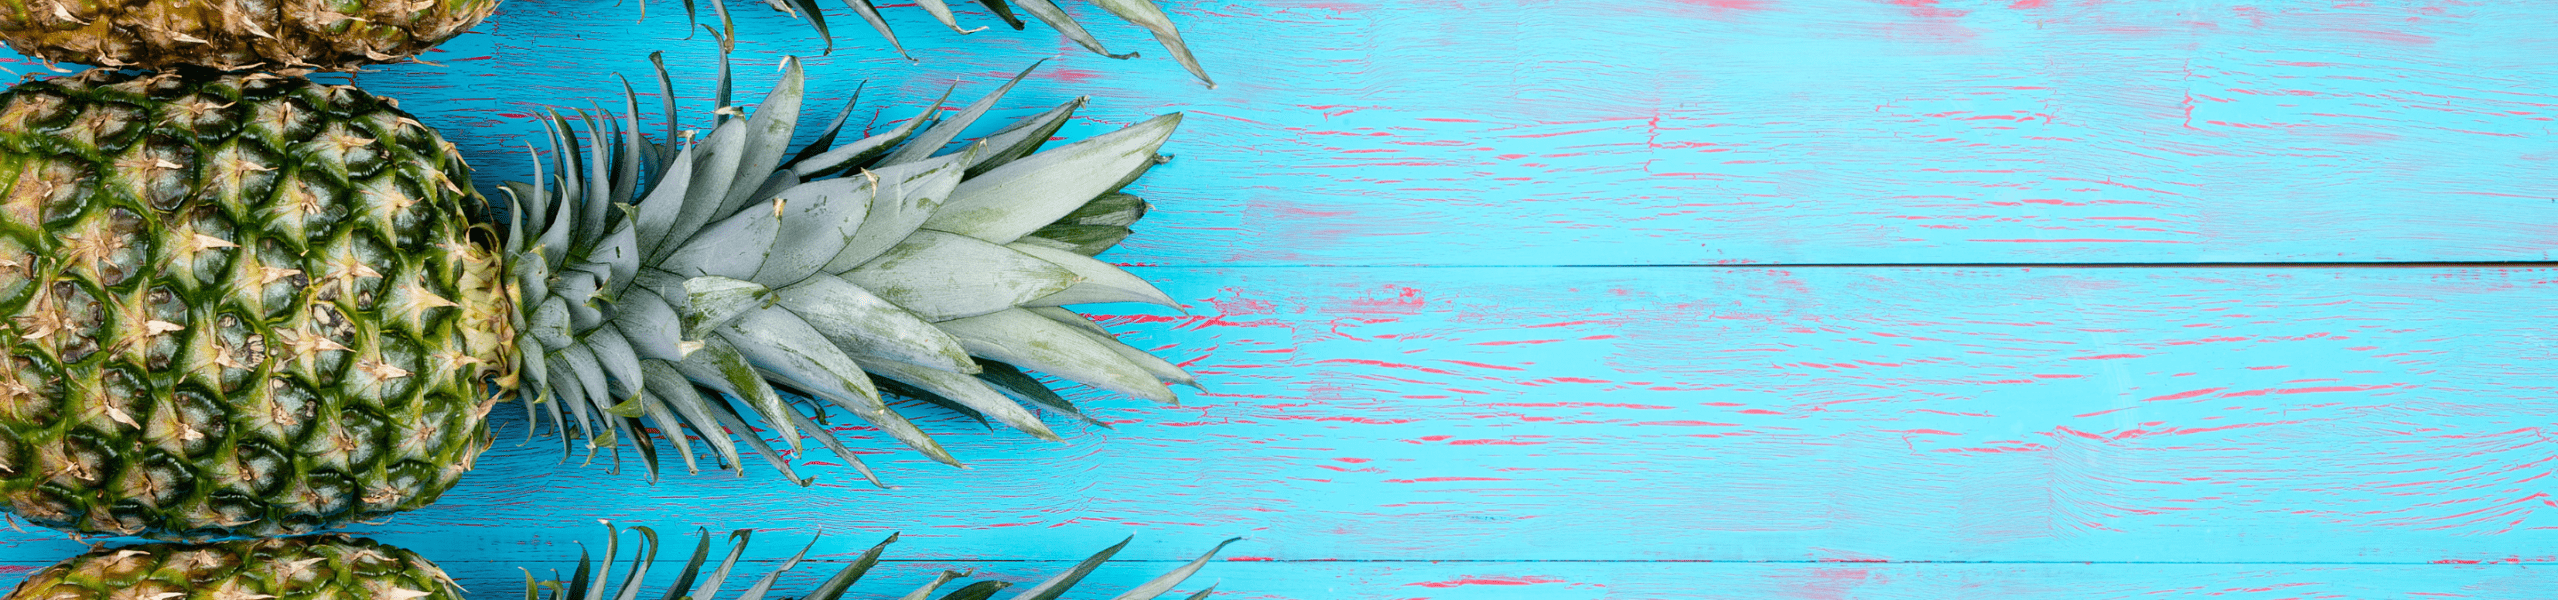 pine apples aligned vertically on the left on a worn wooden deck painted blue with red peeking through